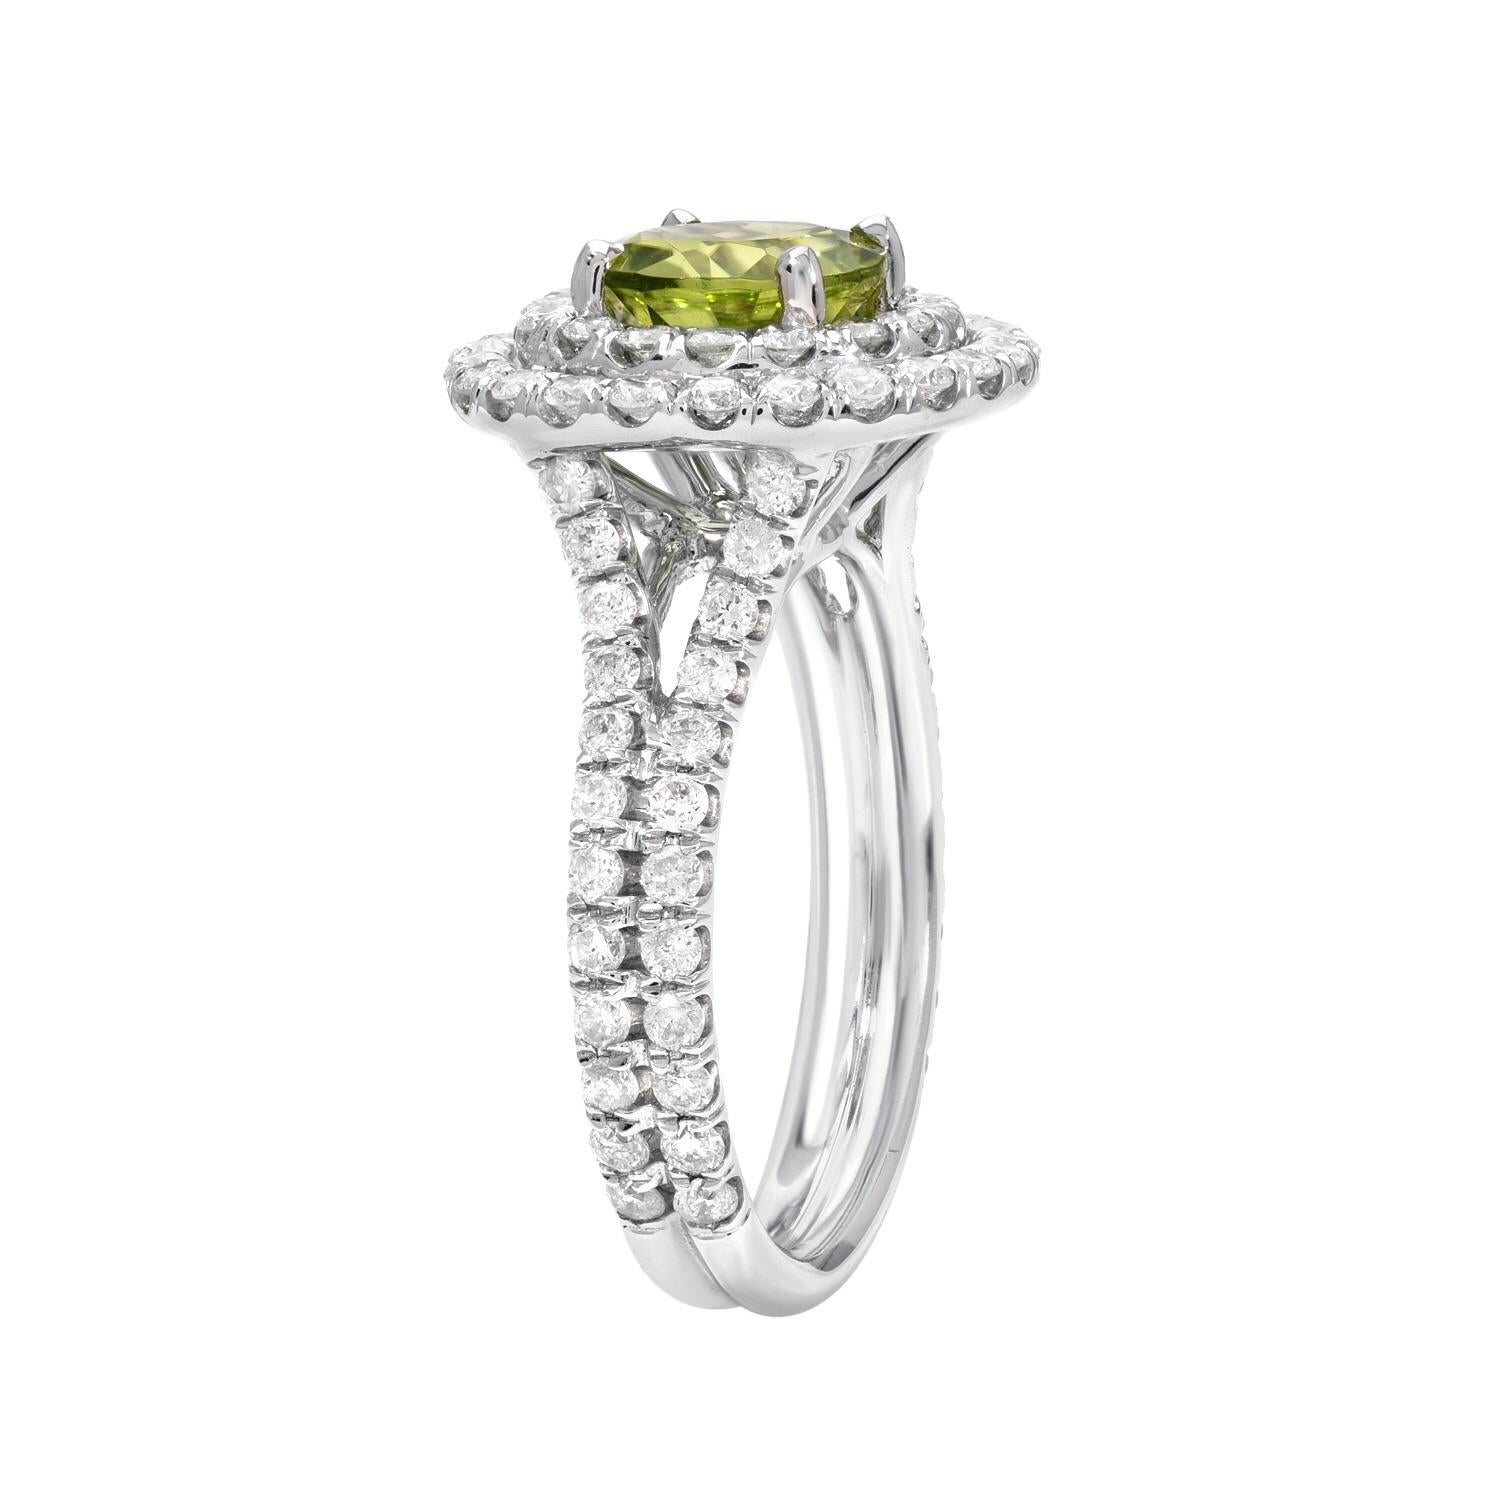 18K white gold ring set with a very desirable 1.41 carat round Peridot, decorated with a total of 0.93 carat round brilliant diamonds.
Ring size 5.25. Re-sizing is complementary upon request.
Returns are accepted and paid by us within 7 days of